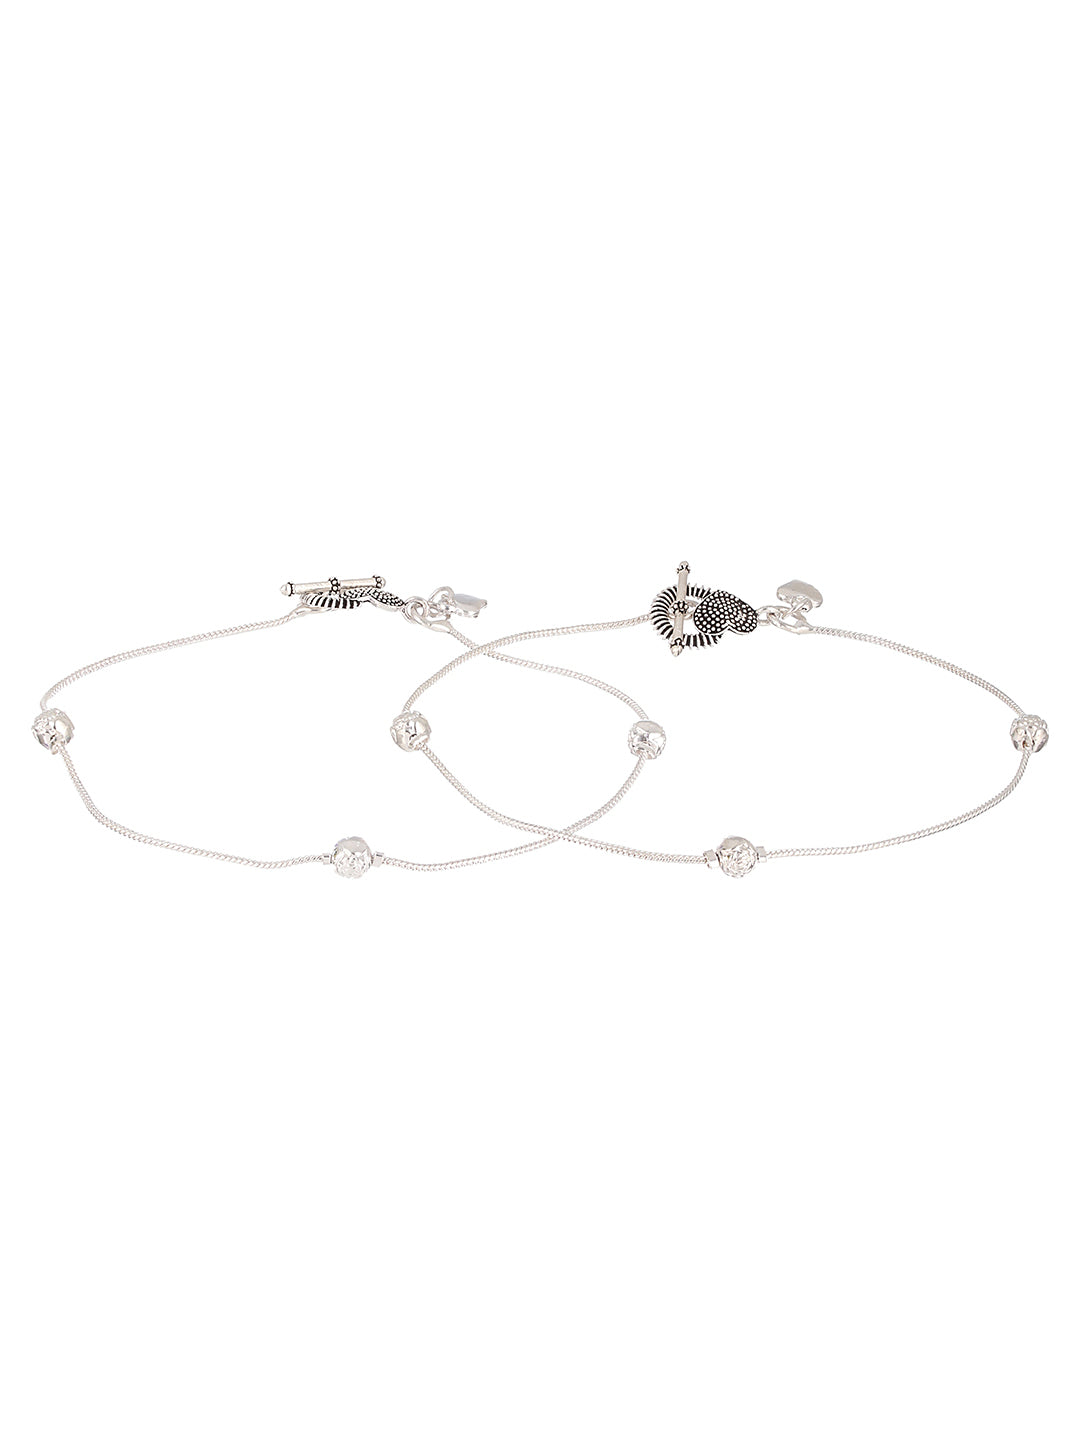 Set of 2 Silver-Plated Beaded Anklets - Jazzandsizzle